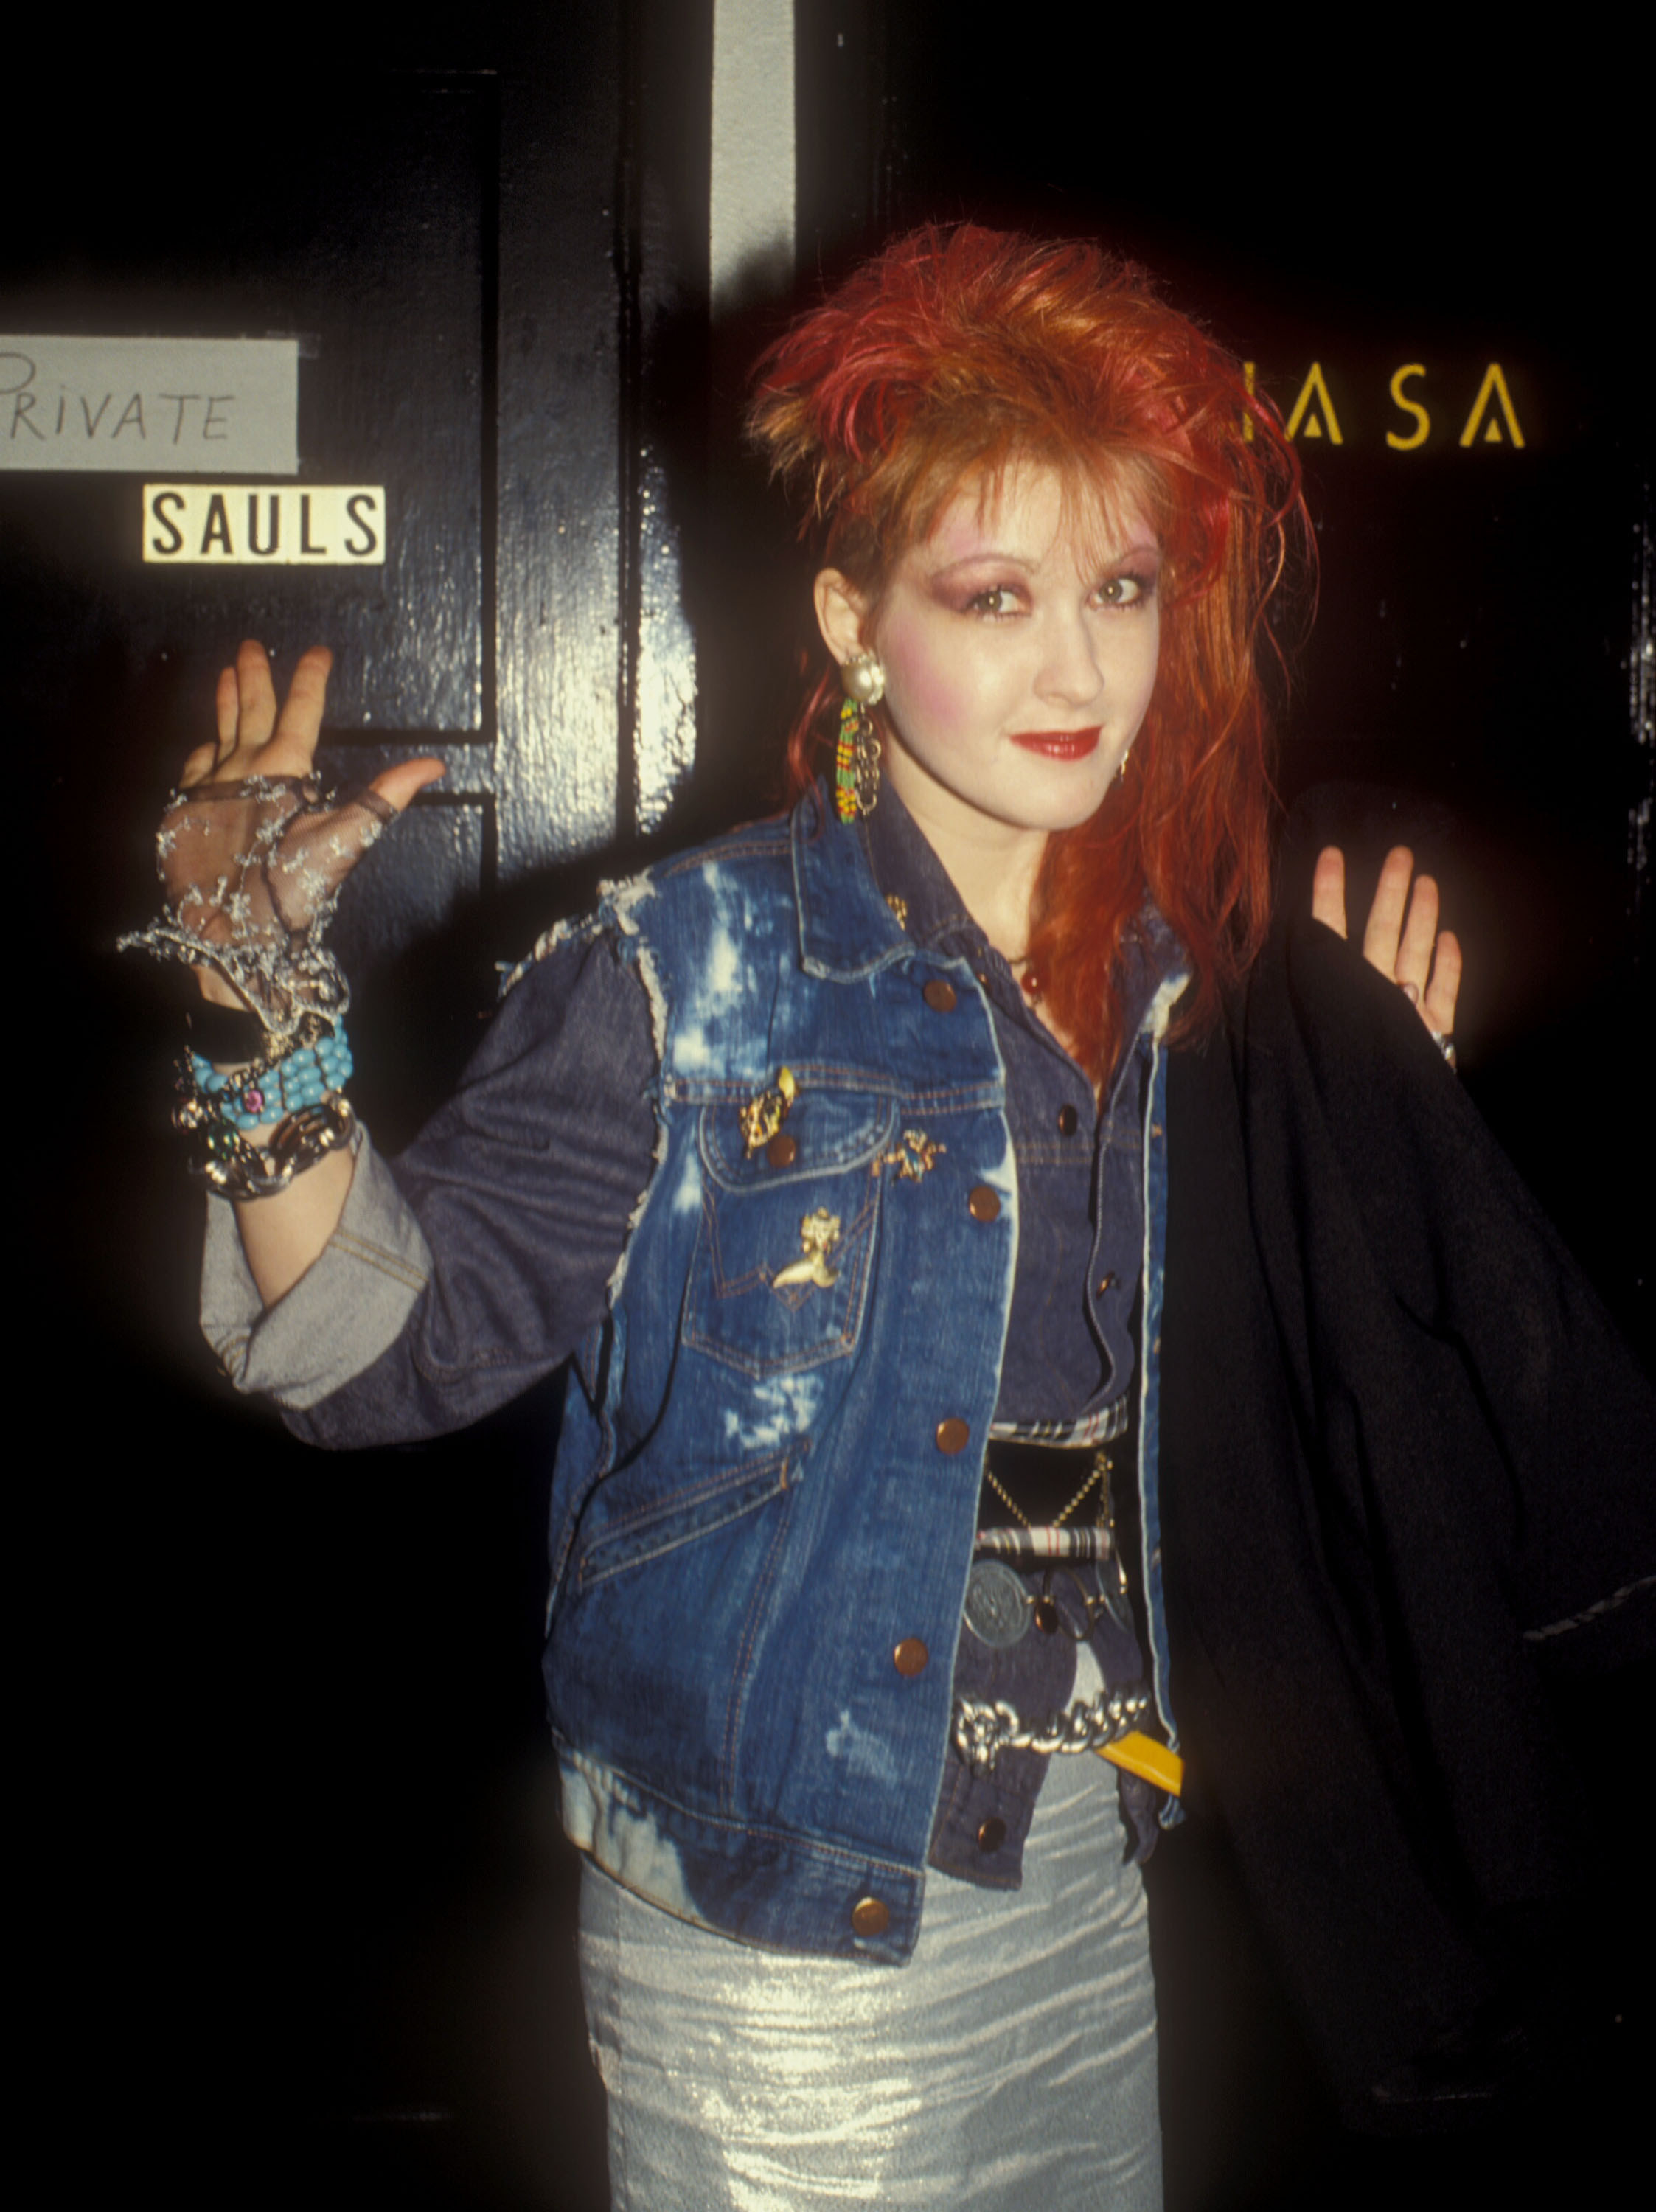 Lauper at an entertainment event in LA in 1984